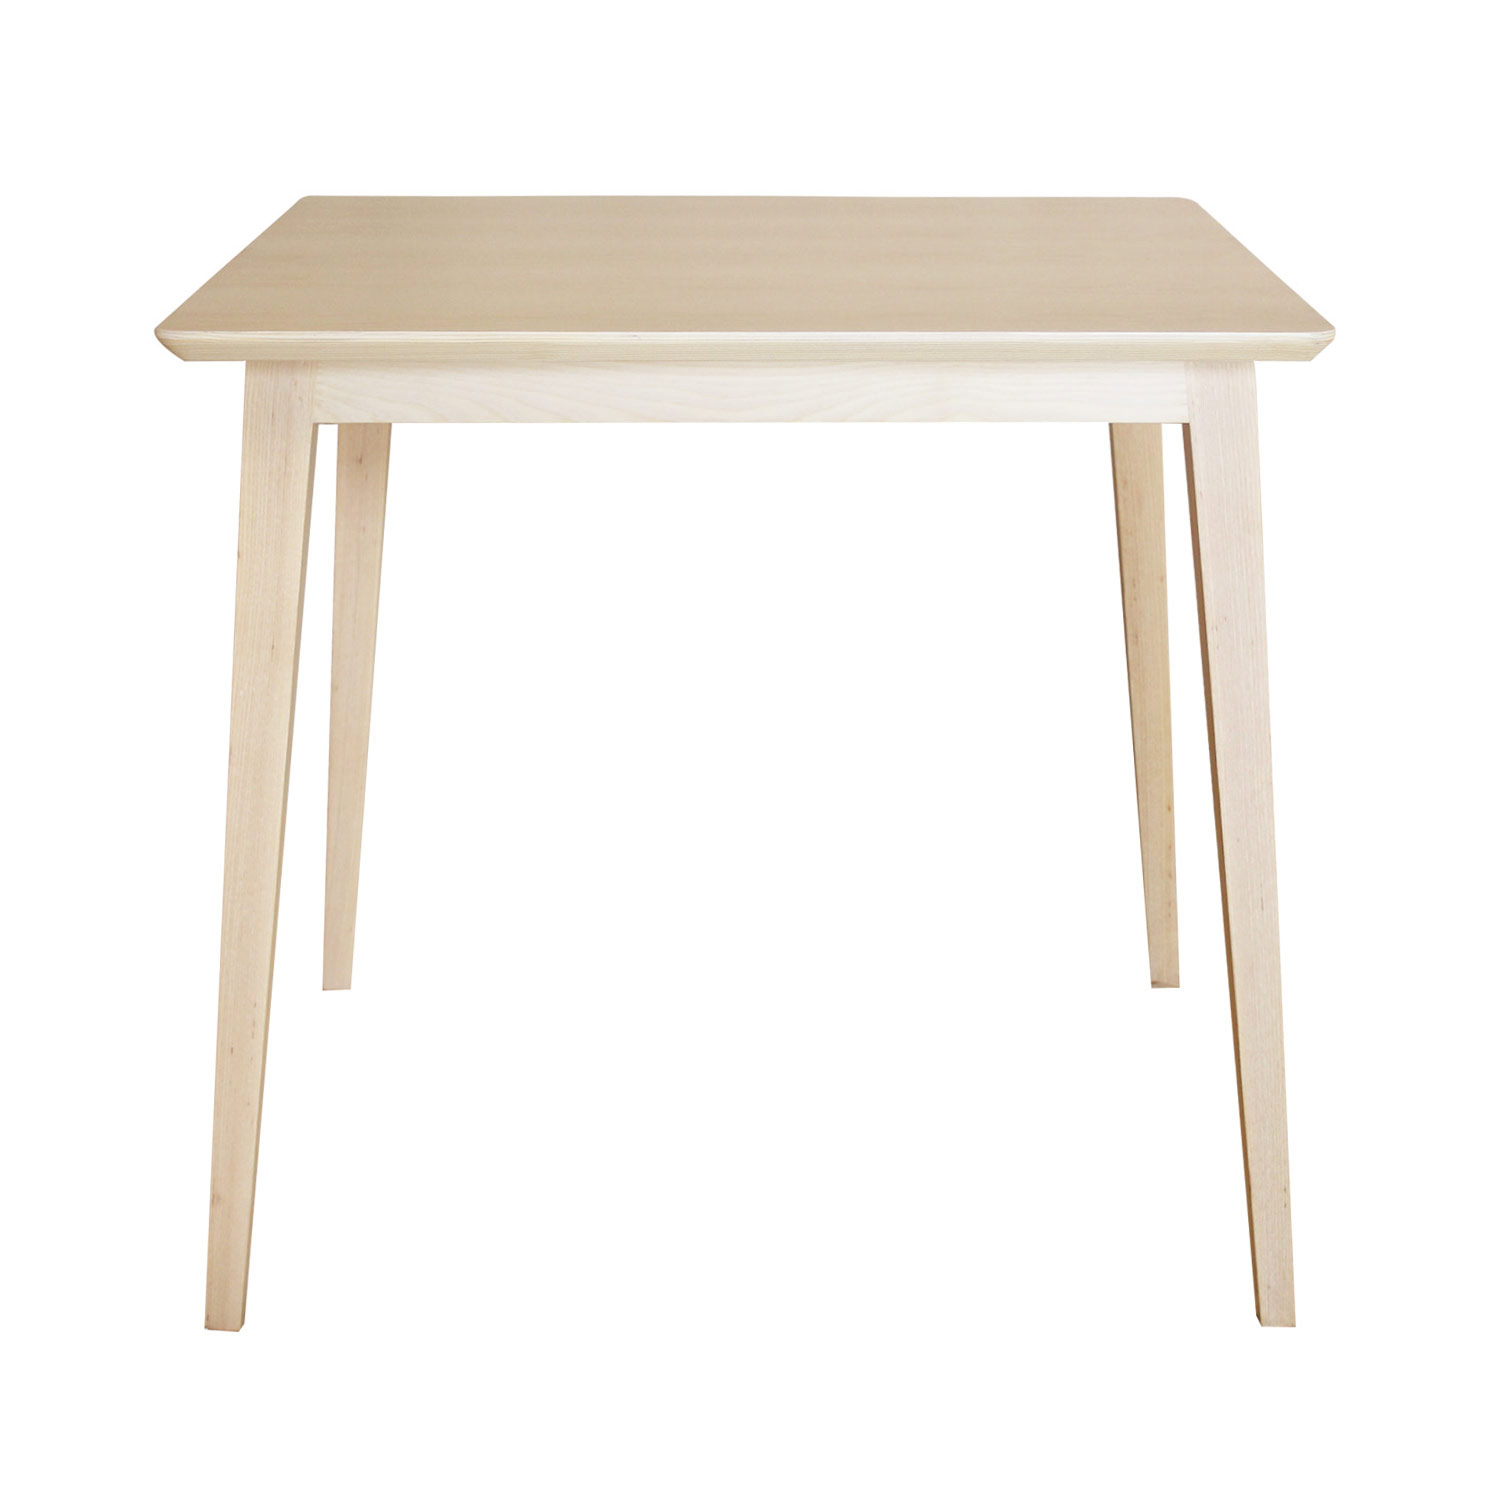 Muko Light Two Seater Dining Table